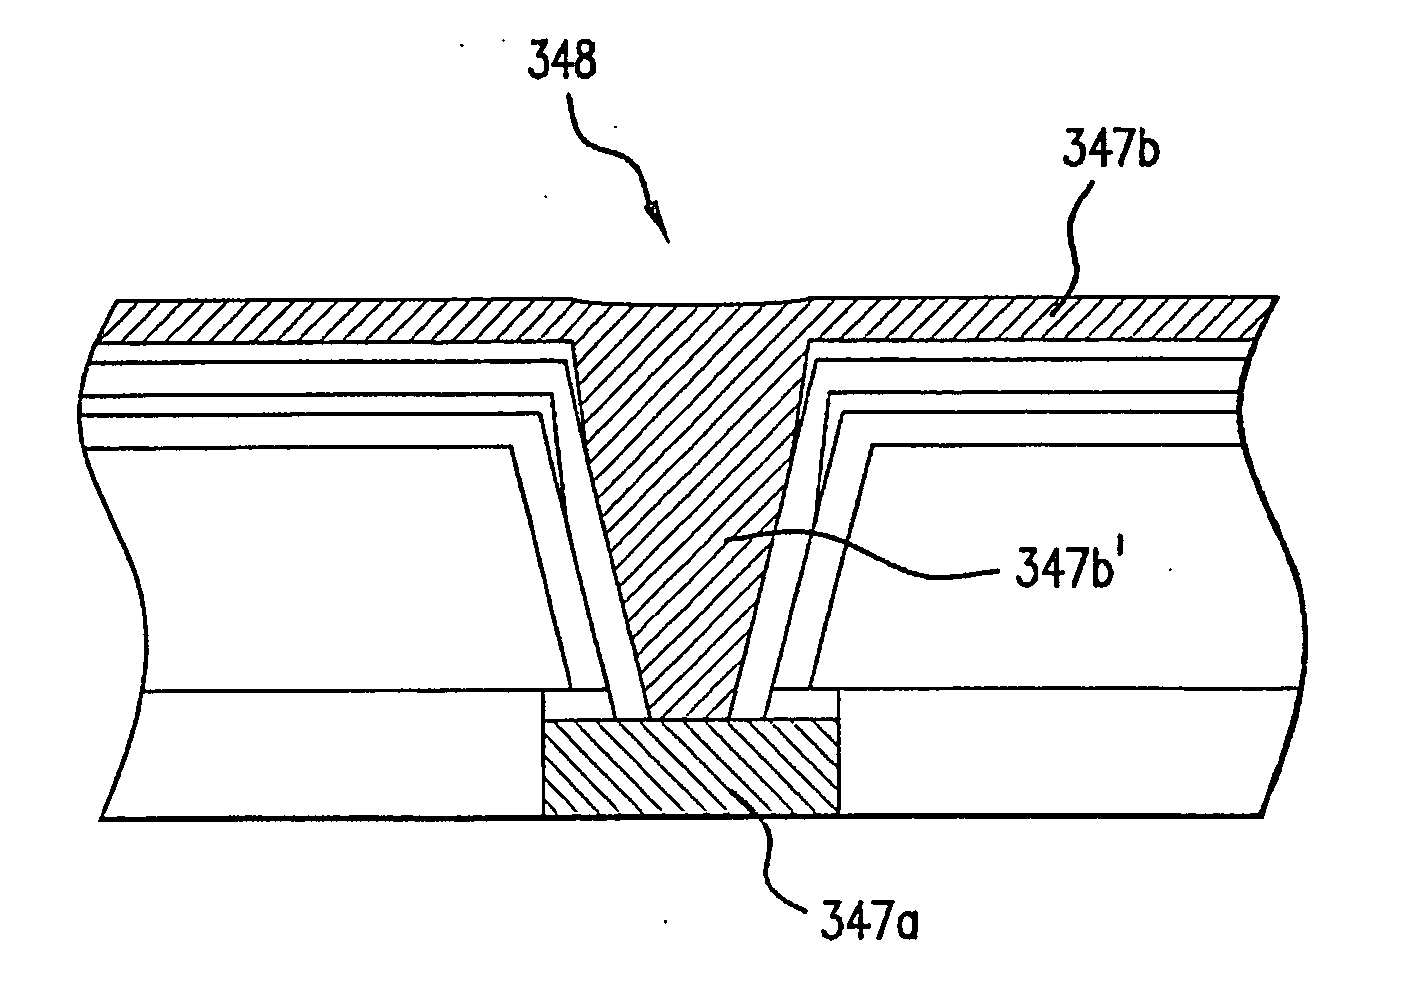 Self-ionized and inductively-coupled plasma for sputtering and resputtering